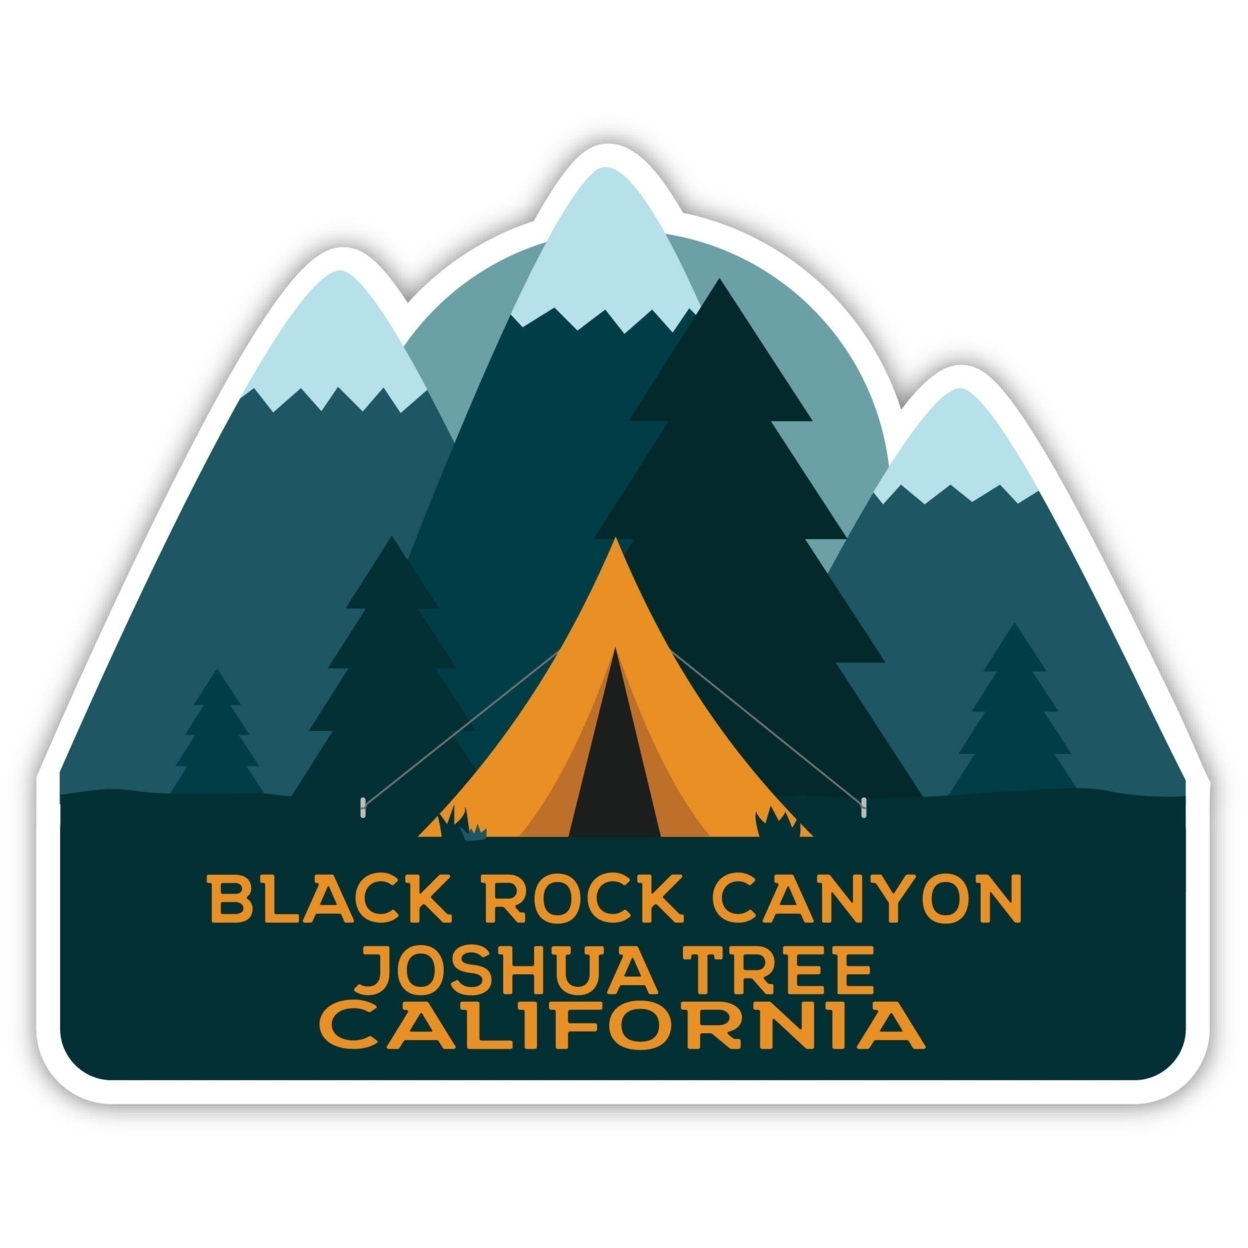 Black Rock Canyon Joshua Tree California Souvenir Decorative Stickers (Choose Theme And Size) - 4-Pack, 8-Inch, Tent